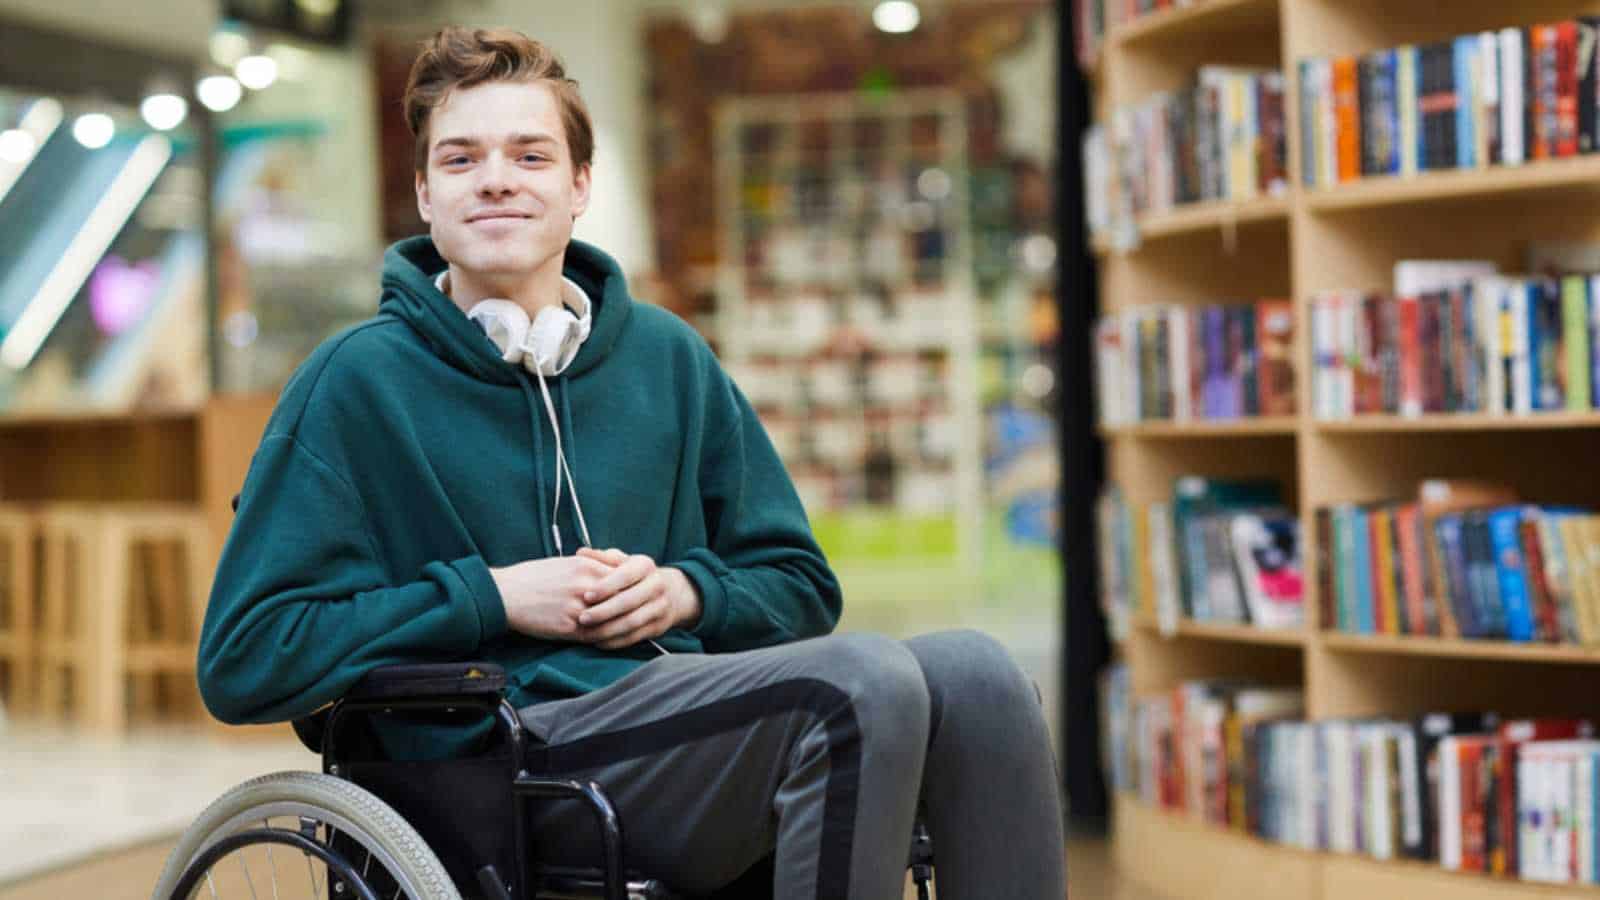 Student in wheel chair